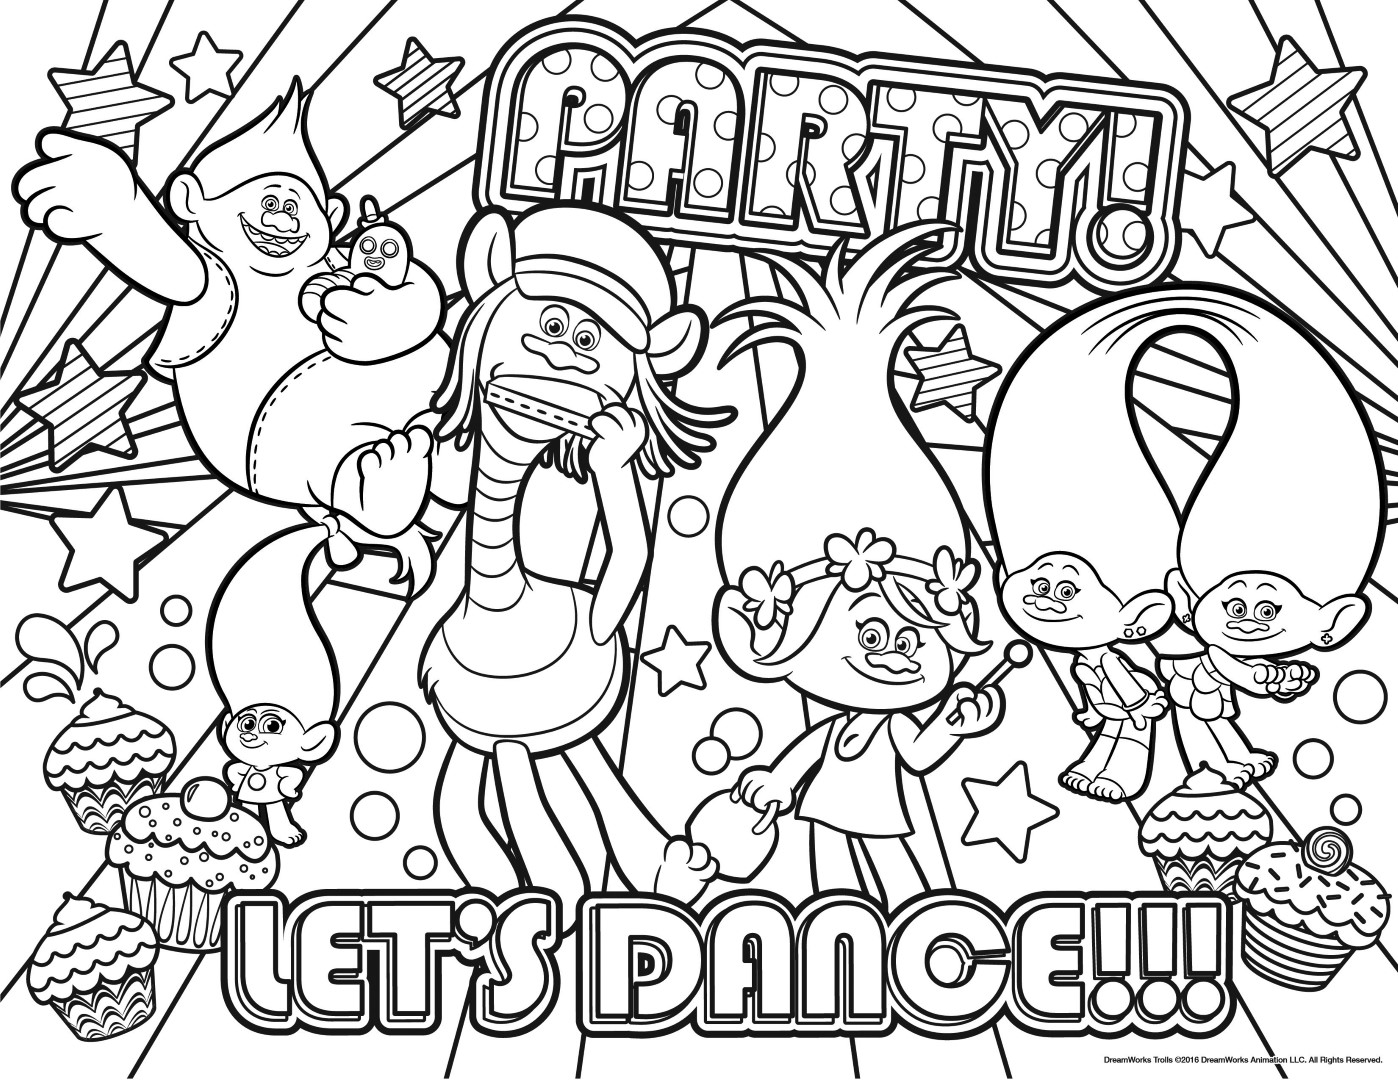 Dance Trolls Coloring Pages 1